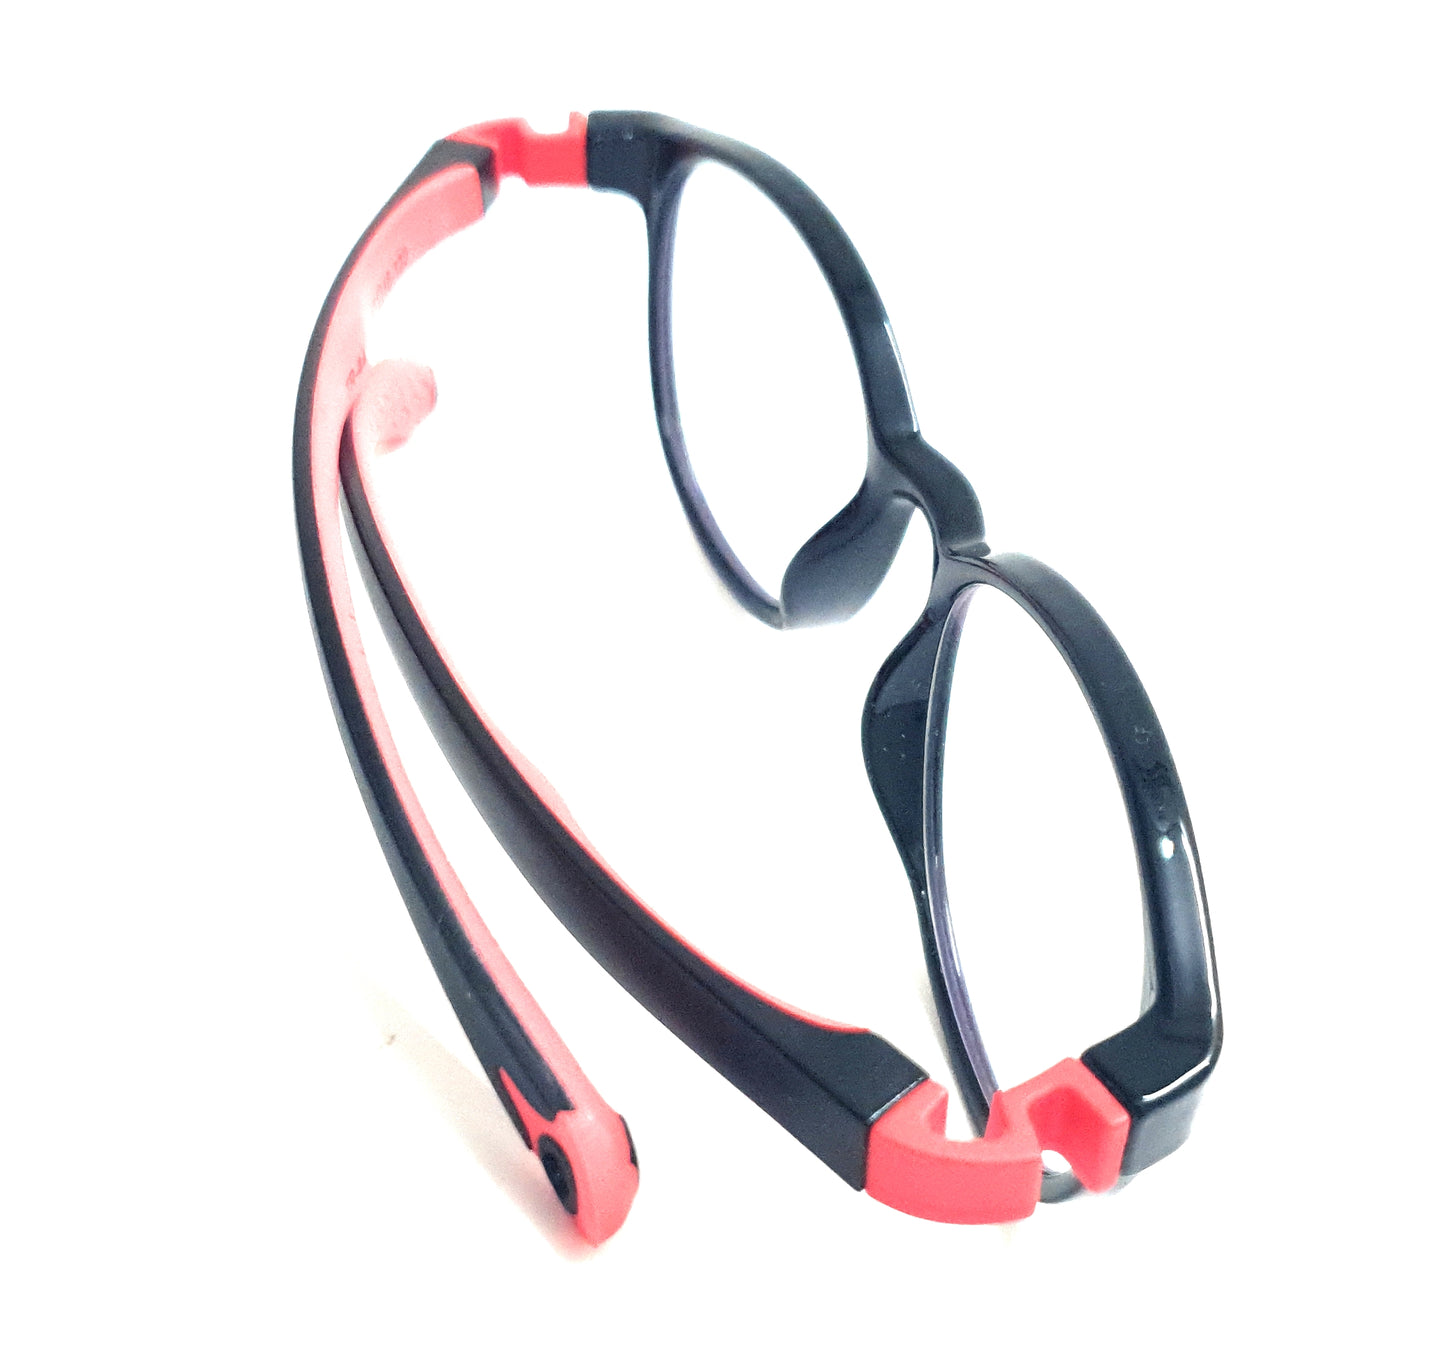 Affaires Kids Blue Light Filter Computer Glasses Flexible Spectacles with anti-reflection for Eye Protection | Zero Power (TR-44) (BC-269) Black-Red